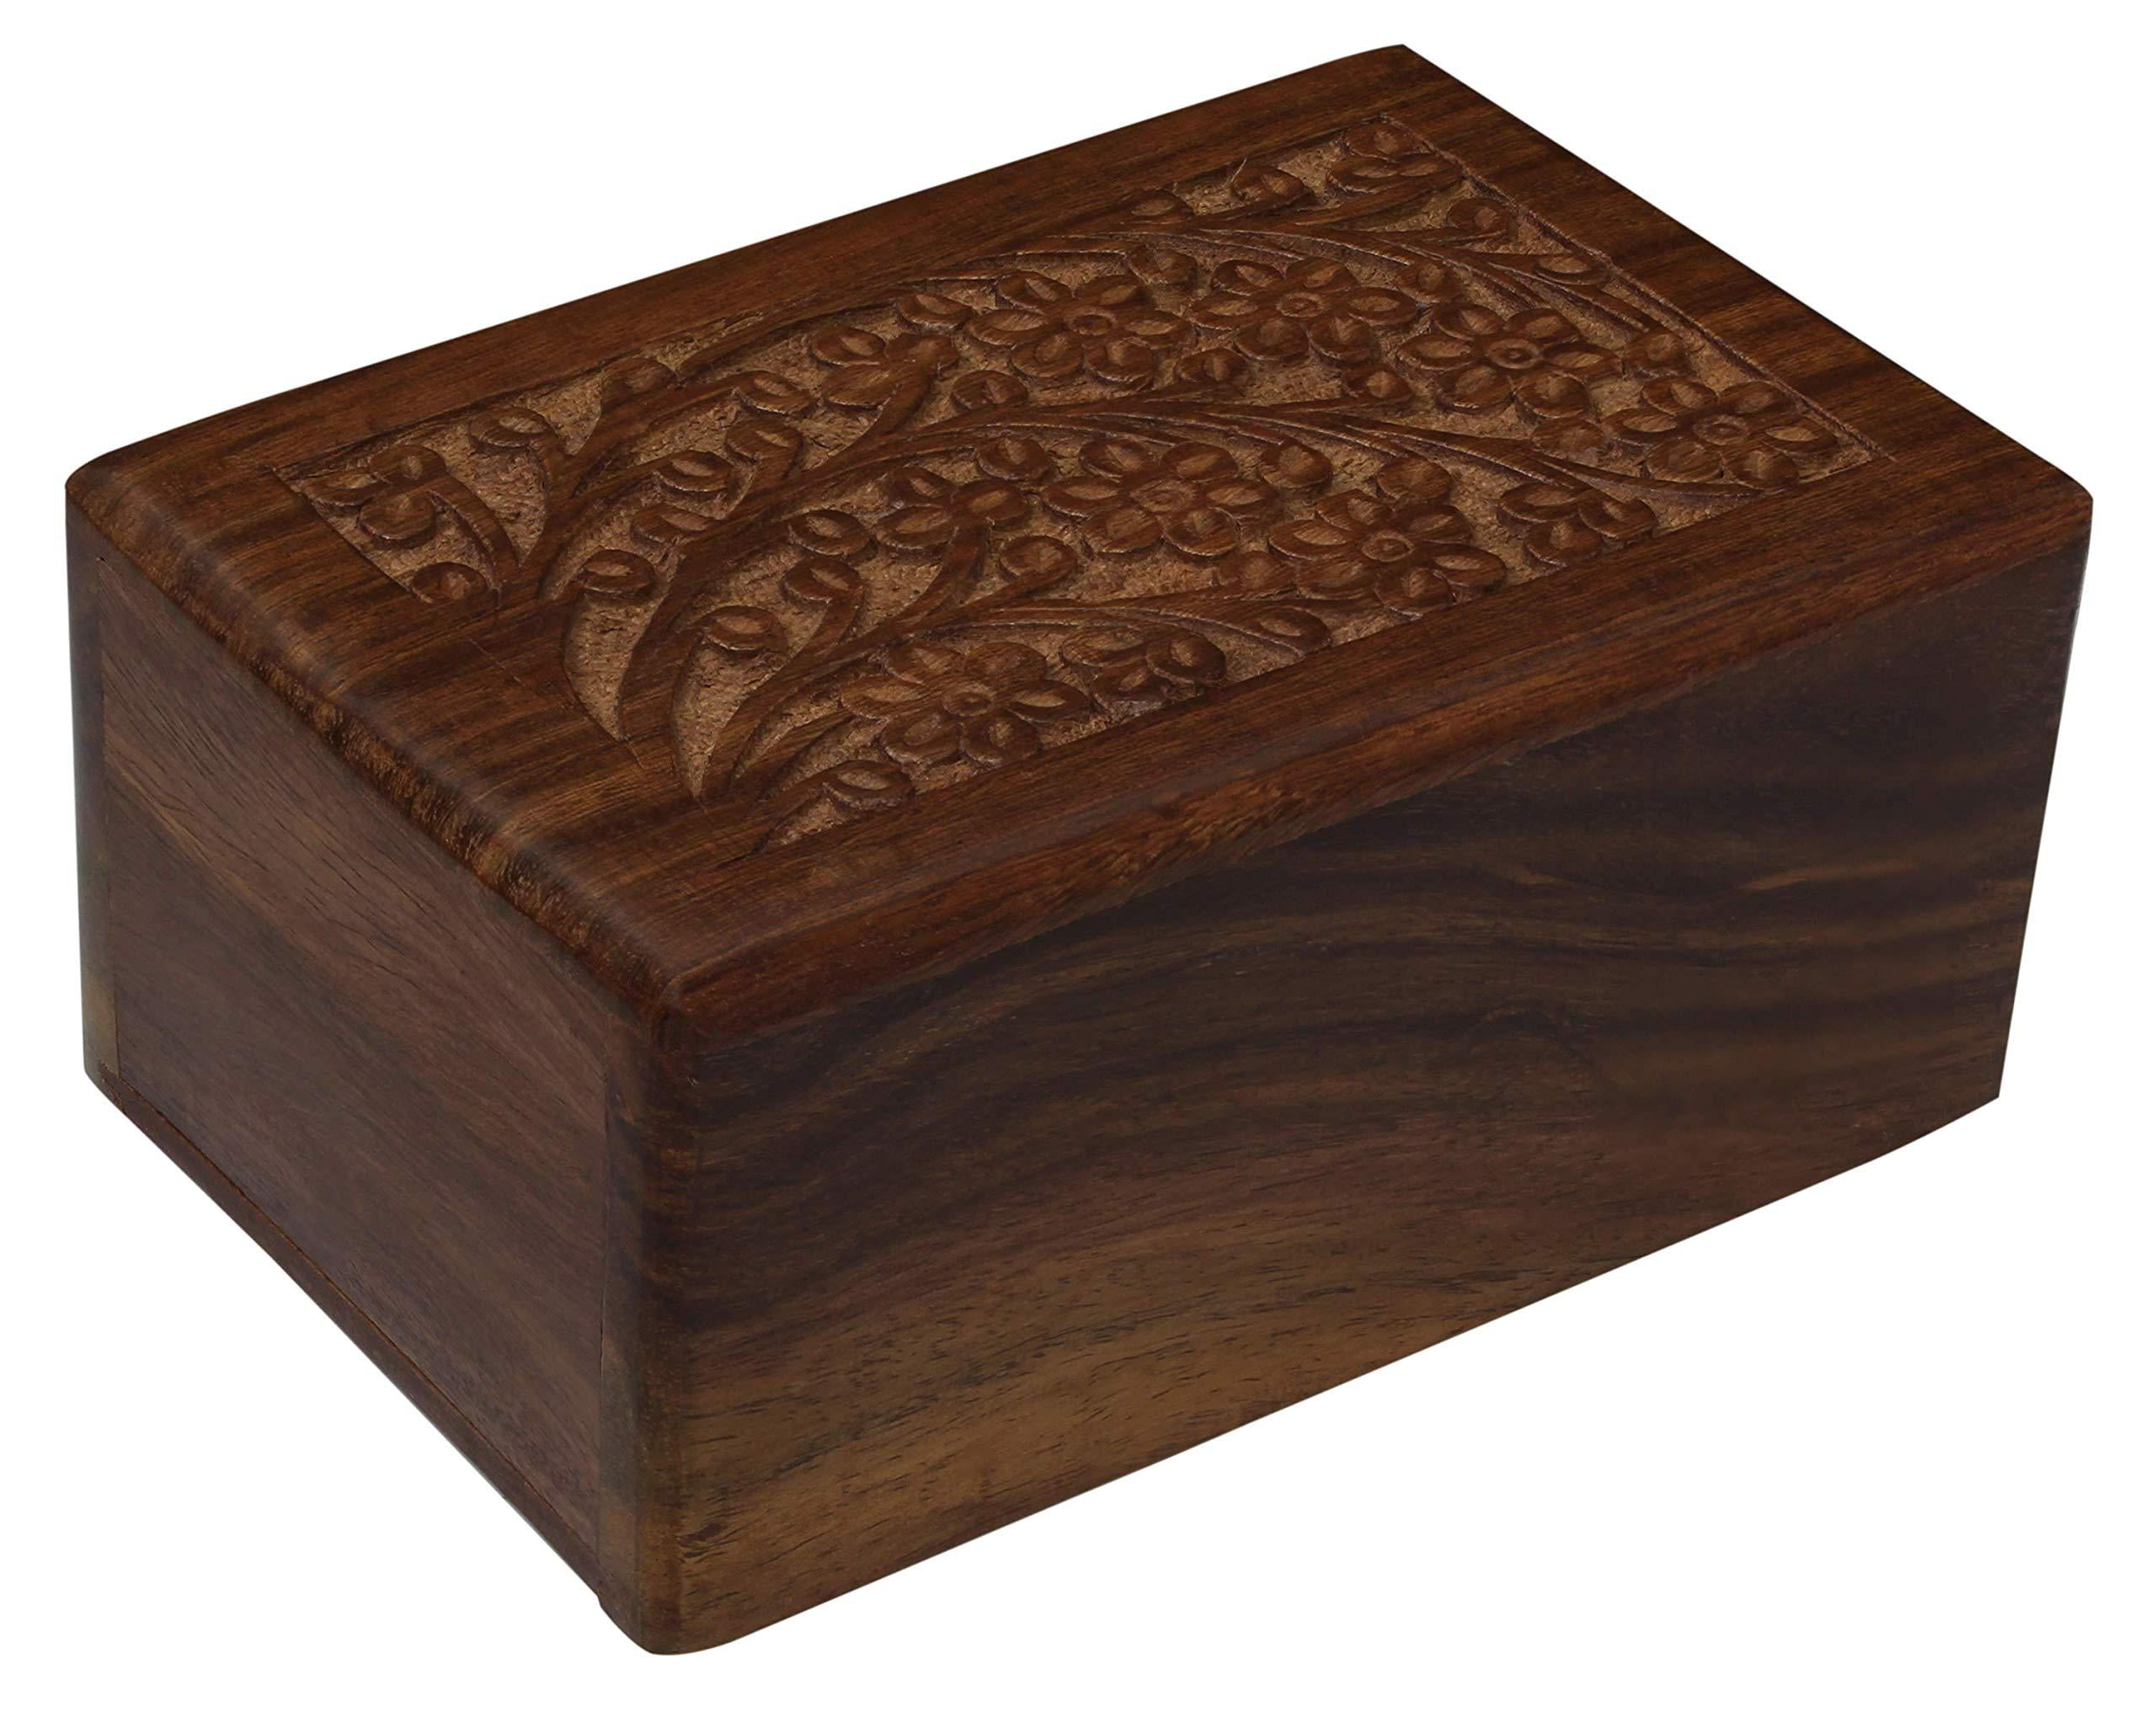 Wood Brown 15 x 10 x 6 cm Something Different Tree of Life Box